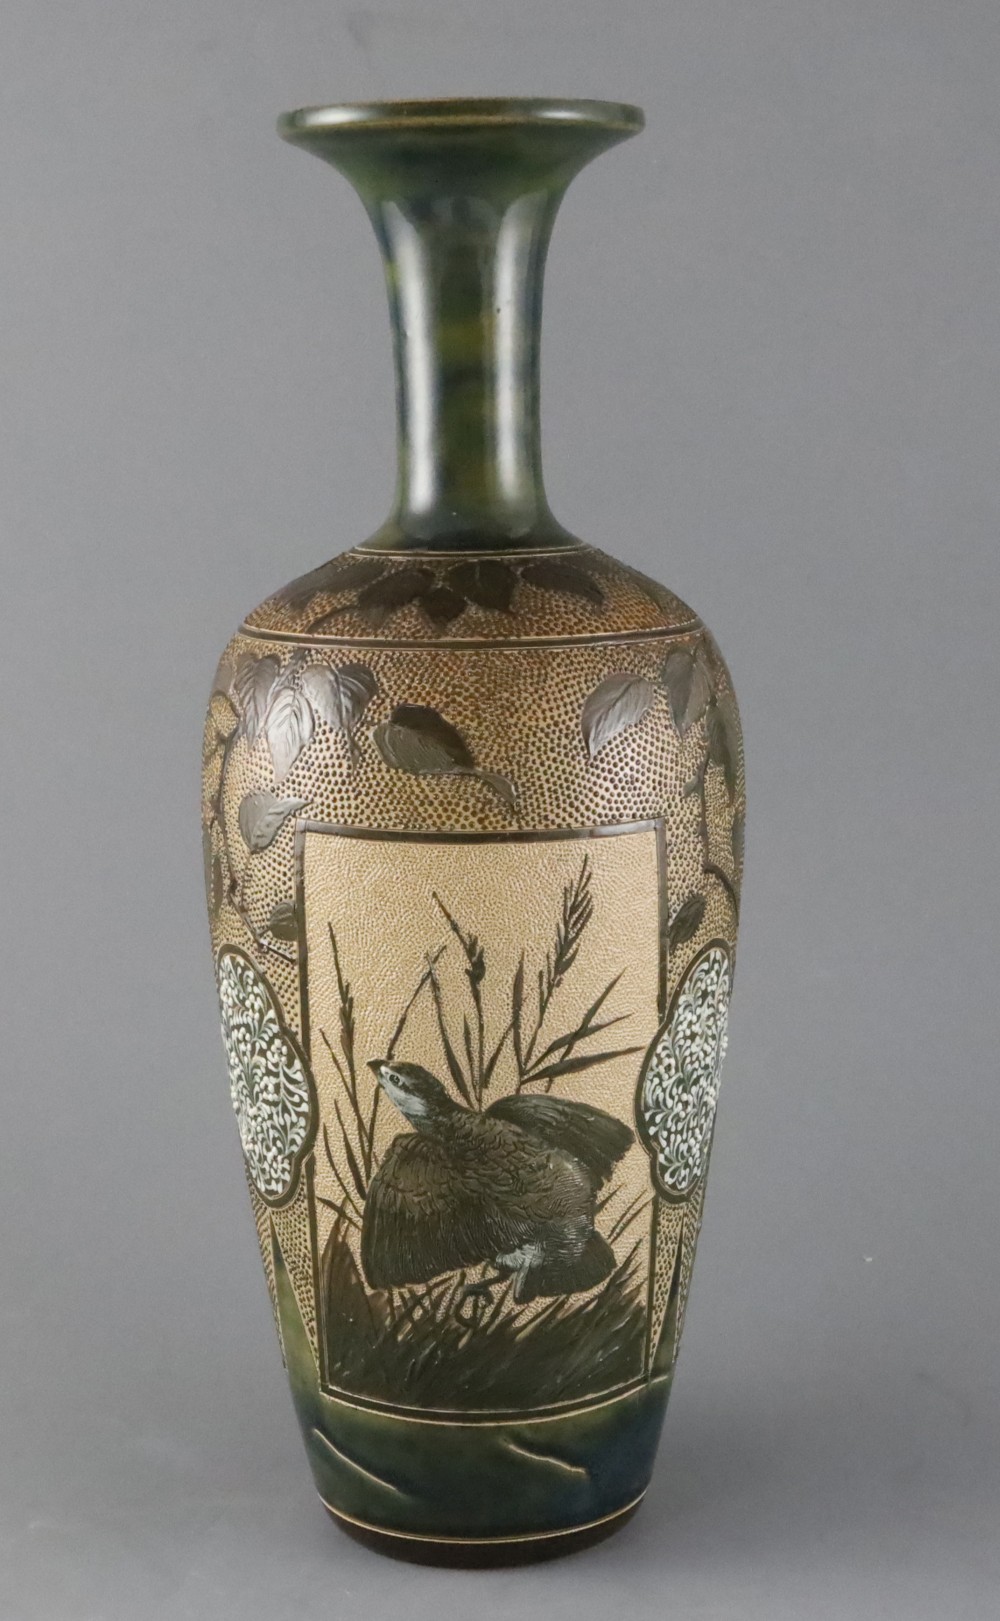 Florence E Barlow for Doulton Lambeth, a large pate sur pate partridge vase, dated 1884, with three panels on leaf and floral ground,